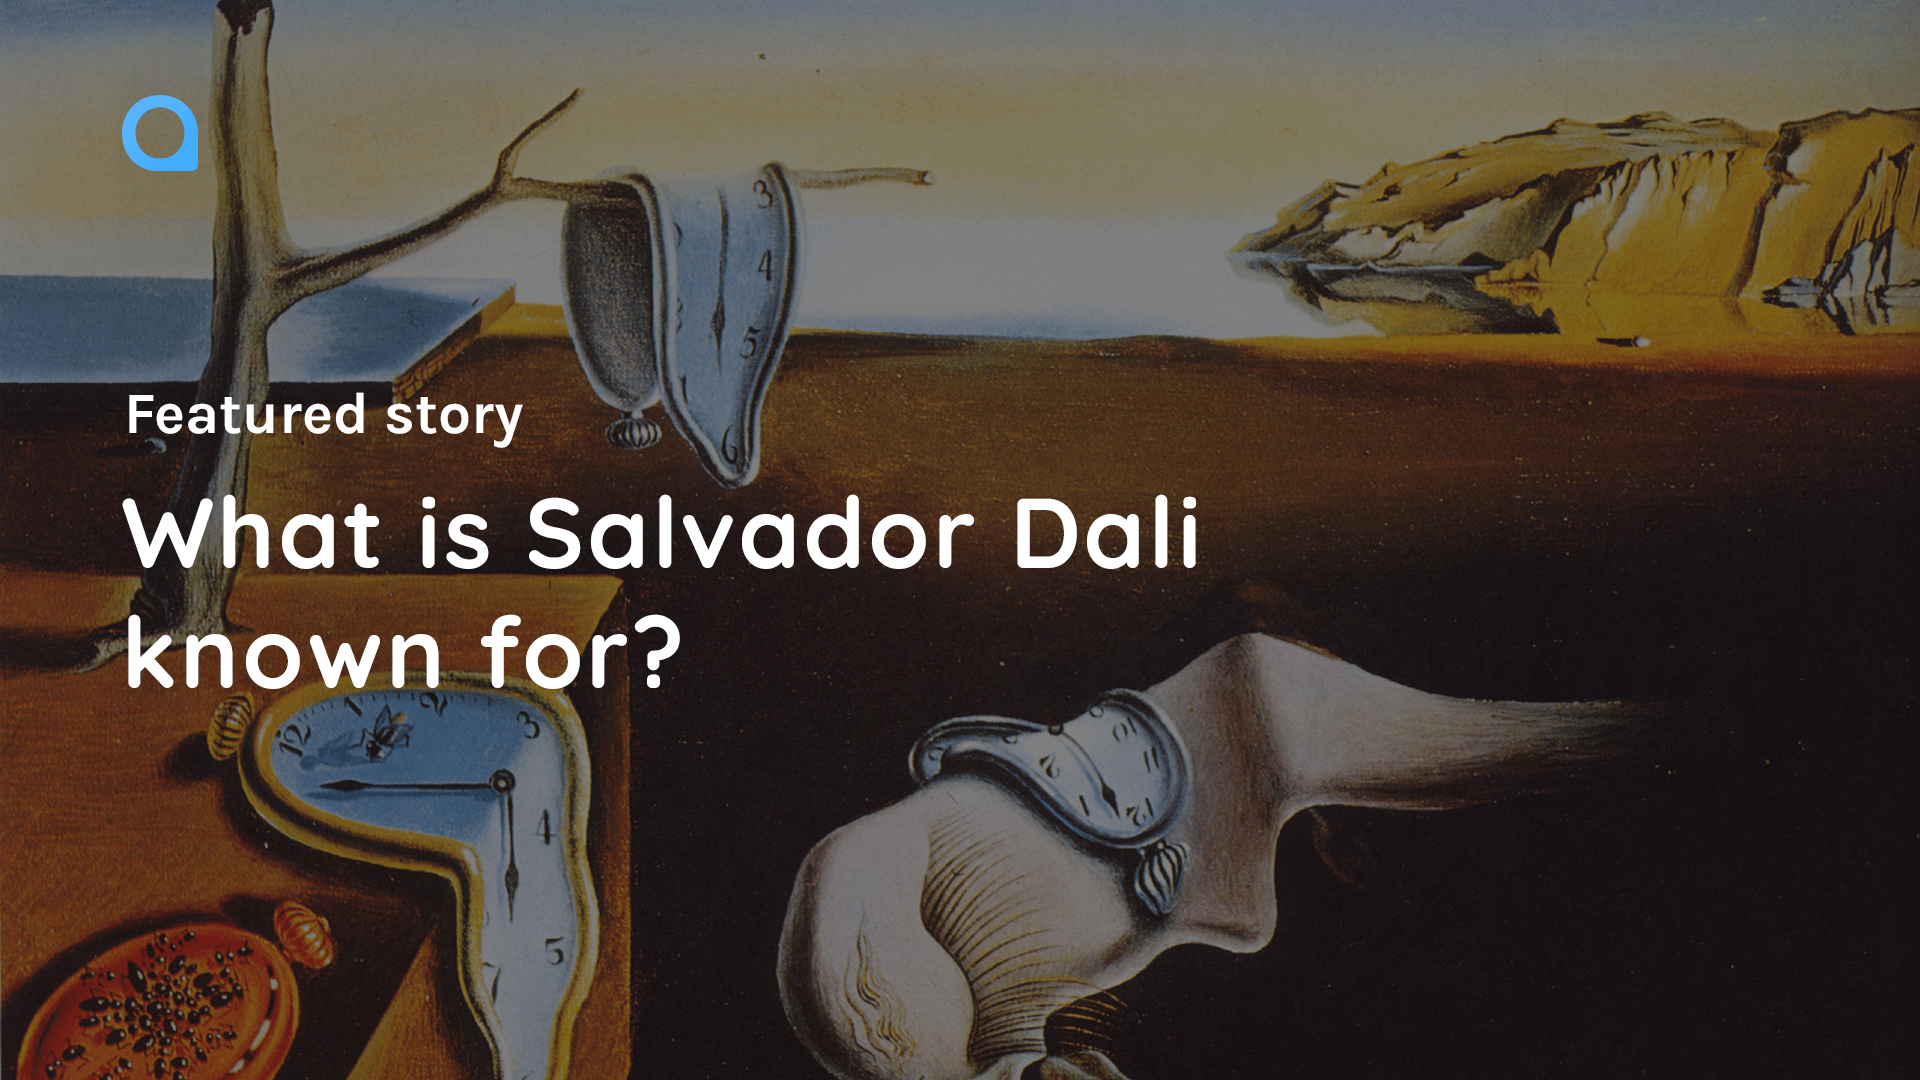 Salvador Dali: The Life and Work of an Icon